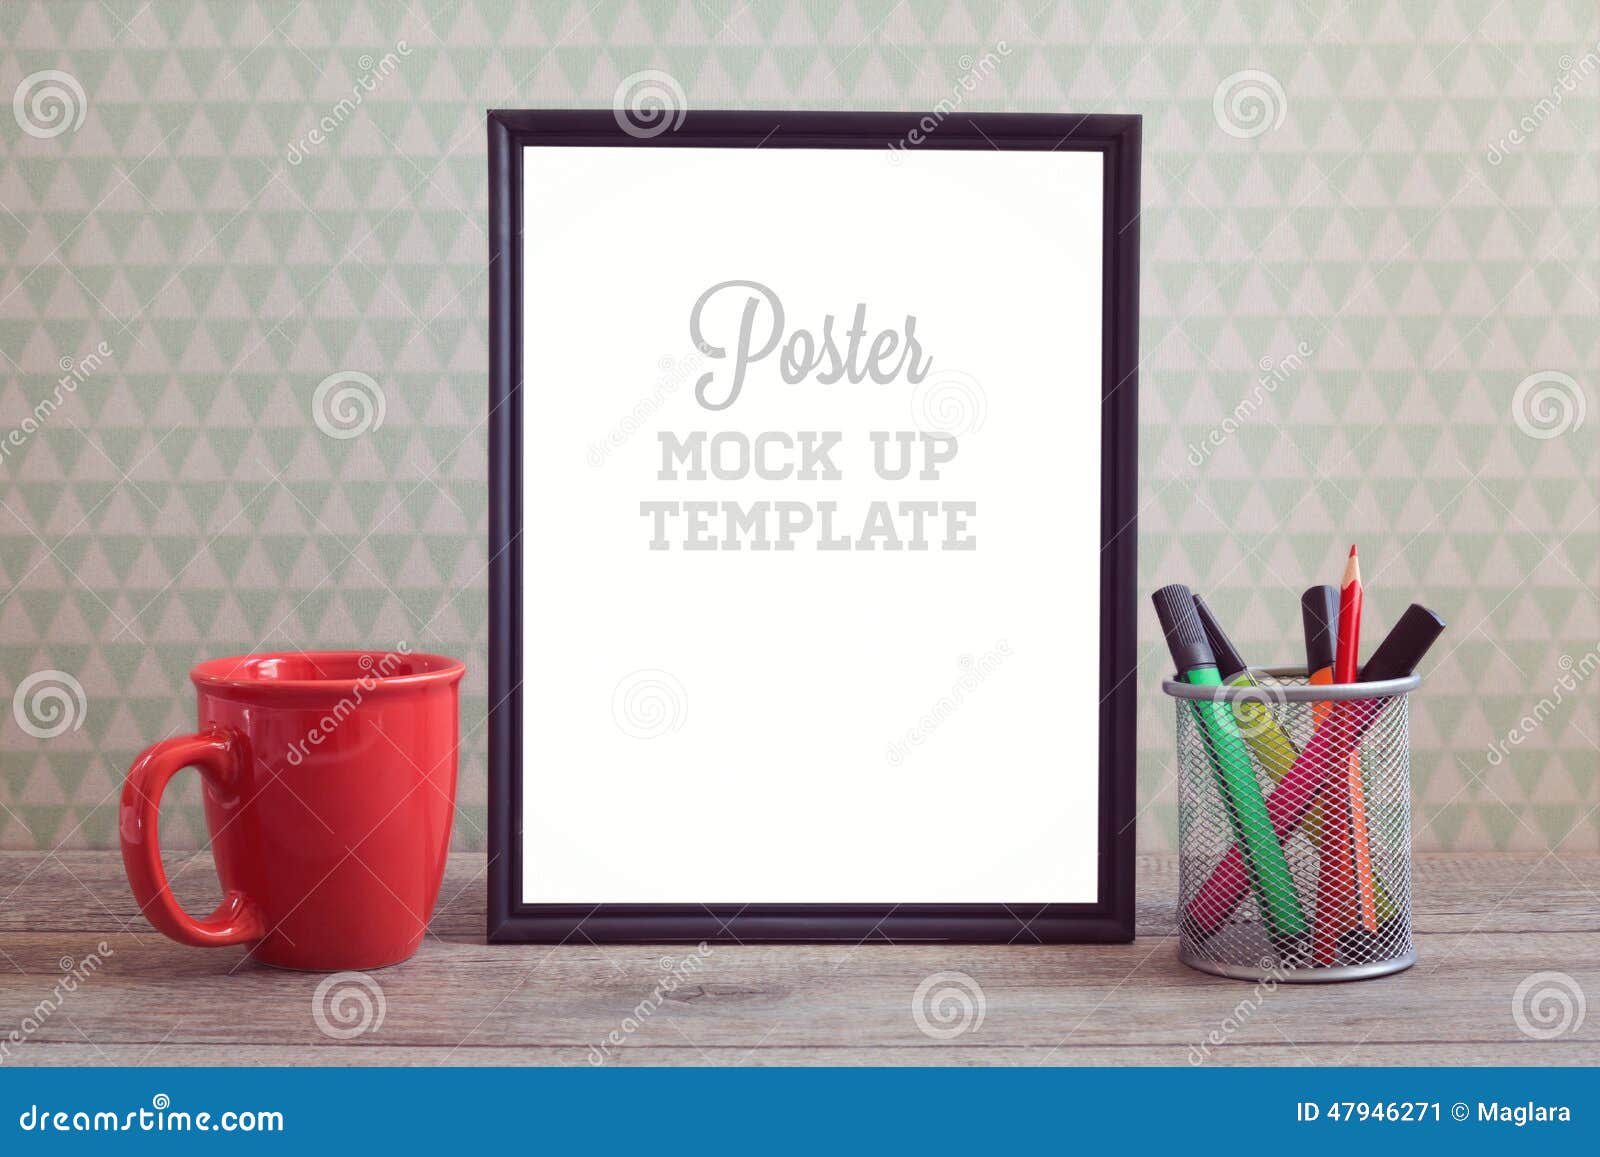 Poster Mock Up Template With Coffee Cup On Wooden Table 